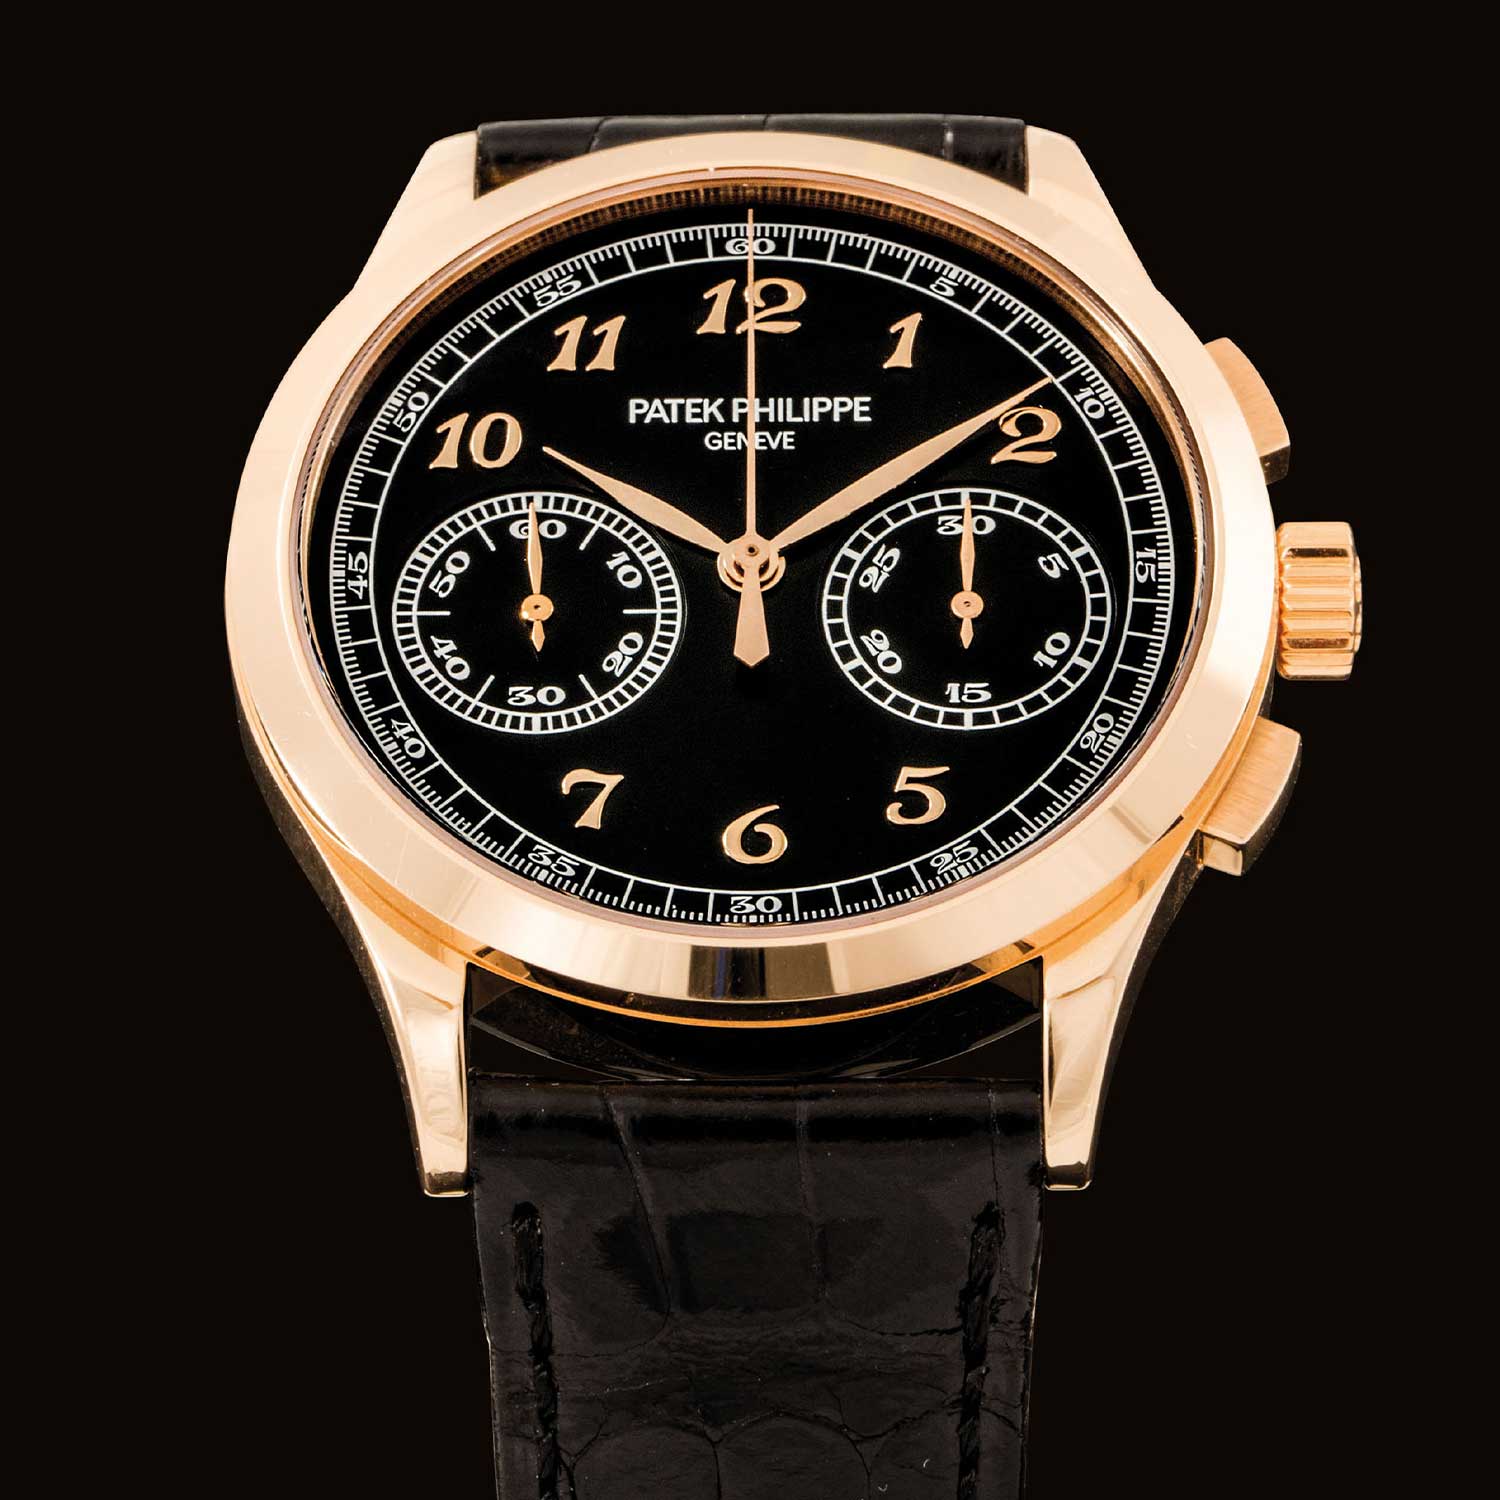 The Ref. 5170R-010 was launched in 2016 alongside the white dial version, the Ref. 5710R-001; this generation of the watch had a rose gold case with applied Breguet hour markers (Image: Christies.com)